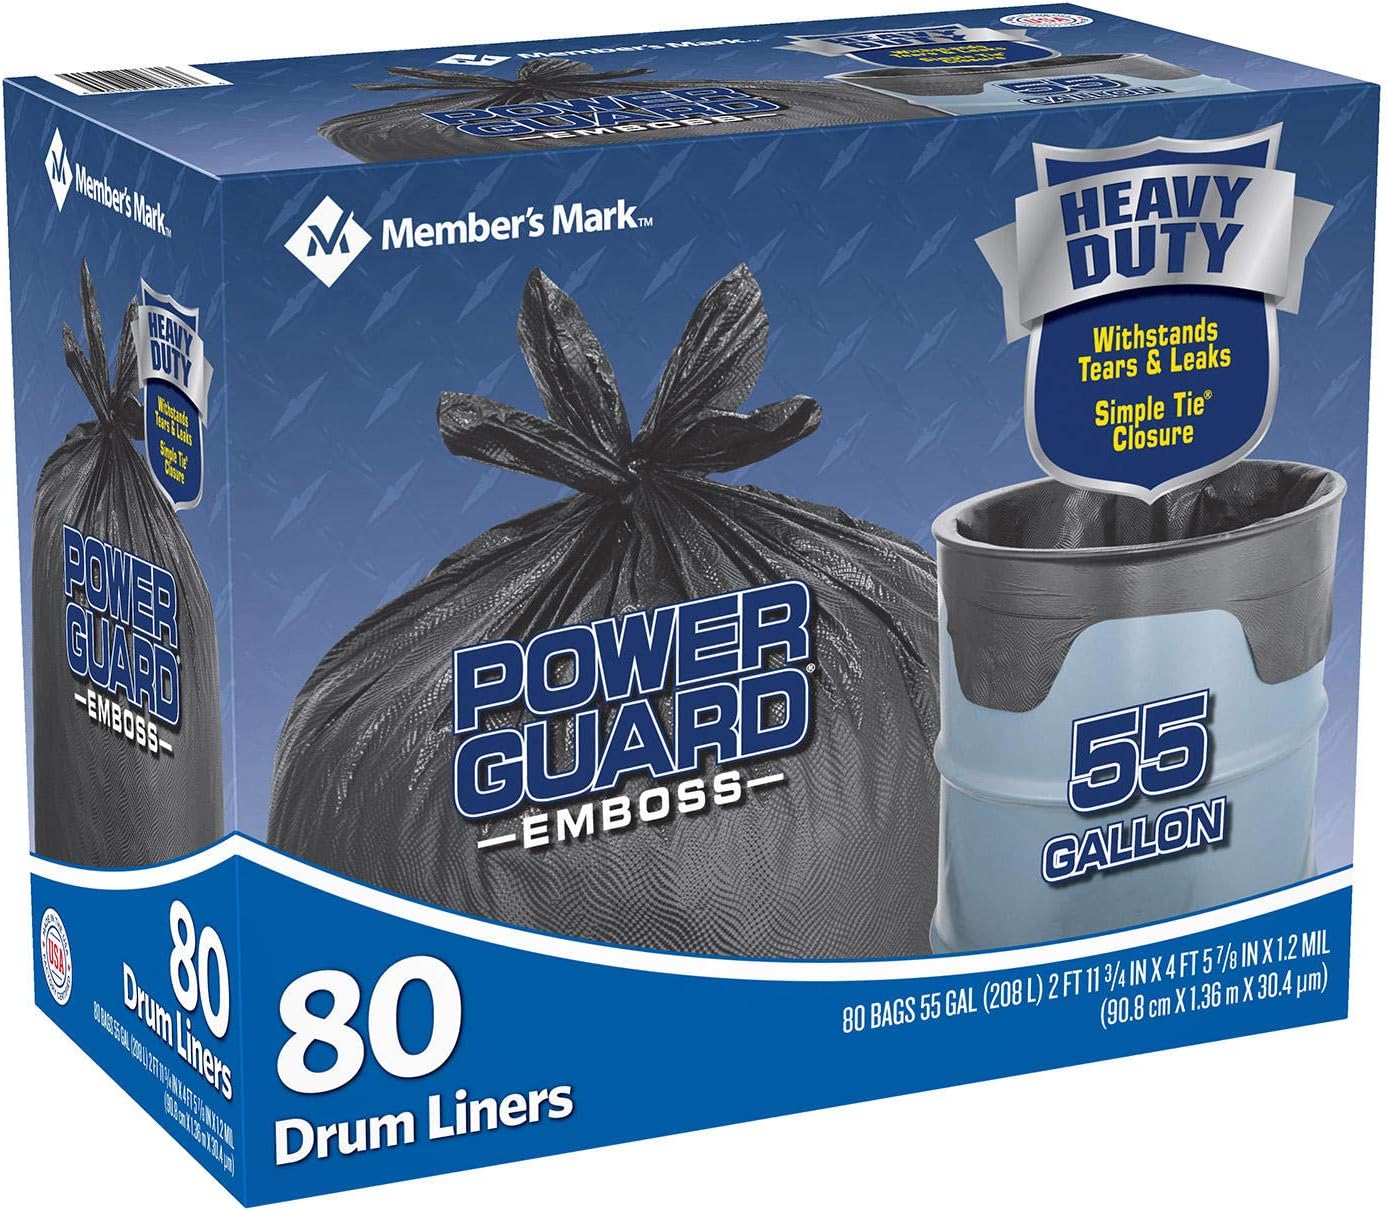 Looking to Buy The Best 55 Gallon Drum Liners. 10 Key Factors You Must Consider Before Buying